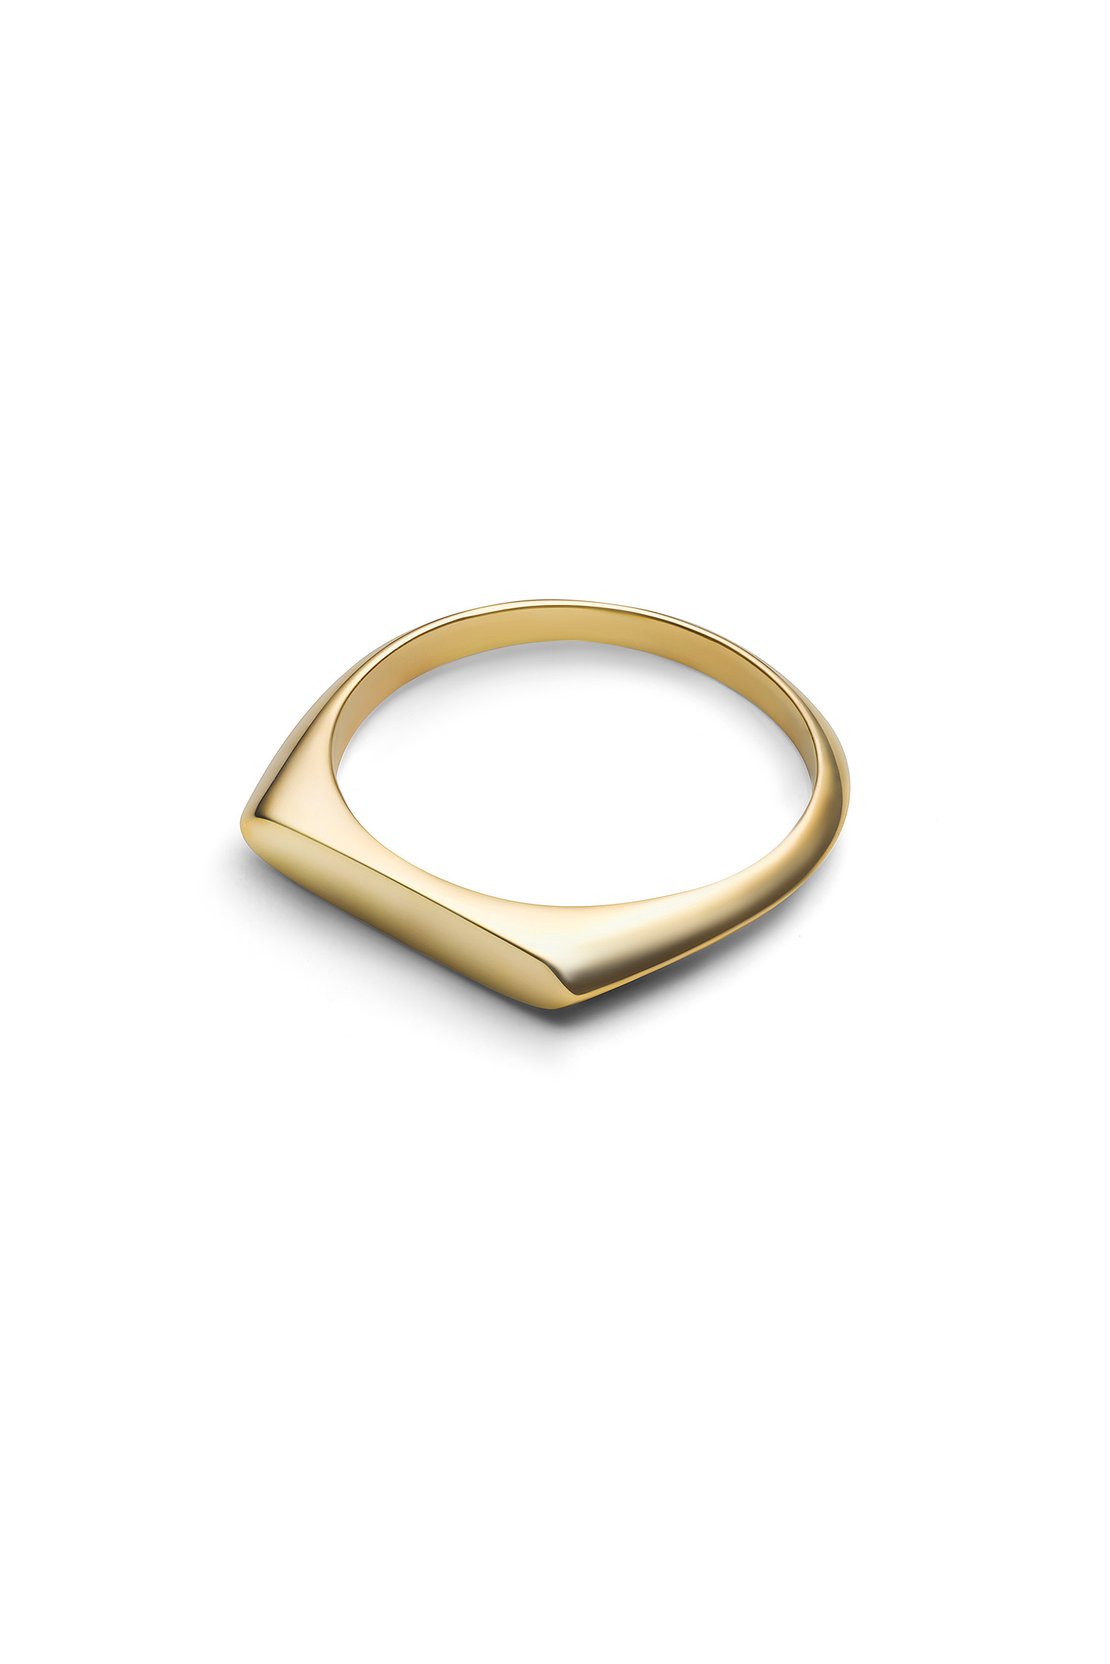 CANOE RING IN GOLD BY JUKSEREI